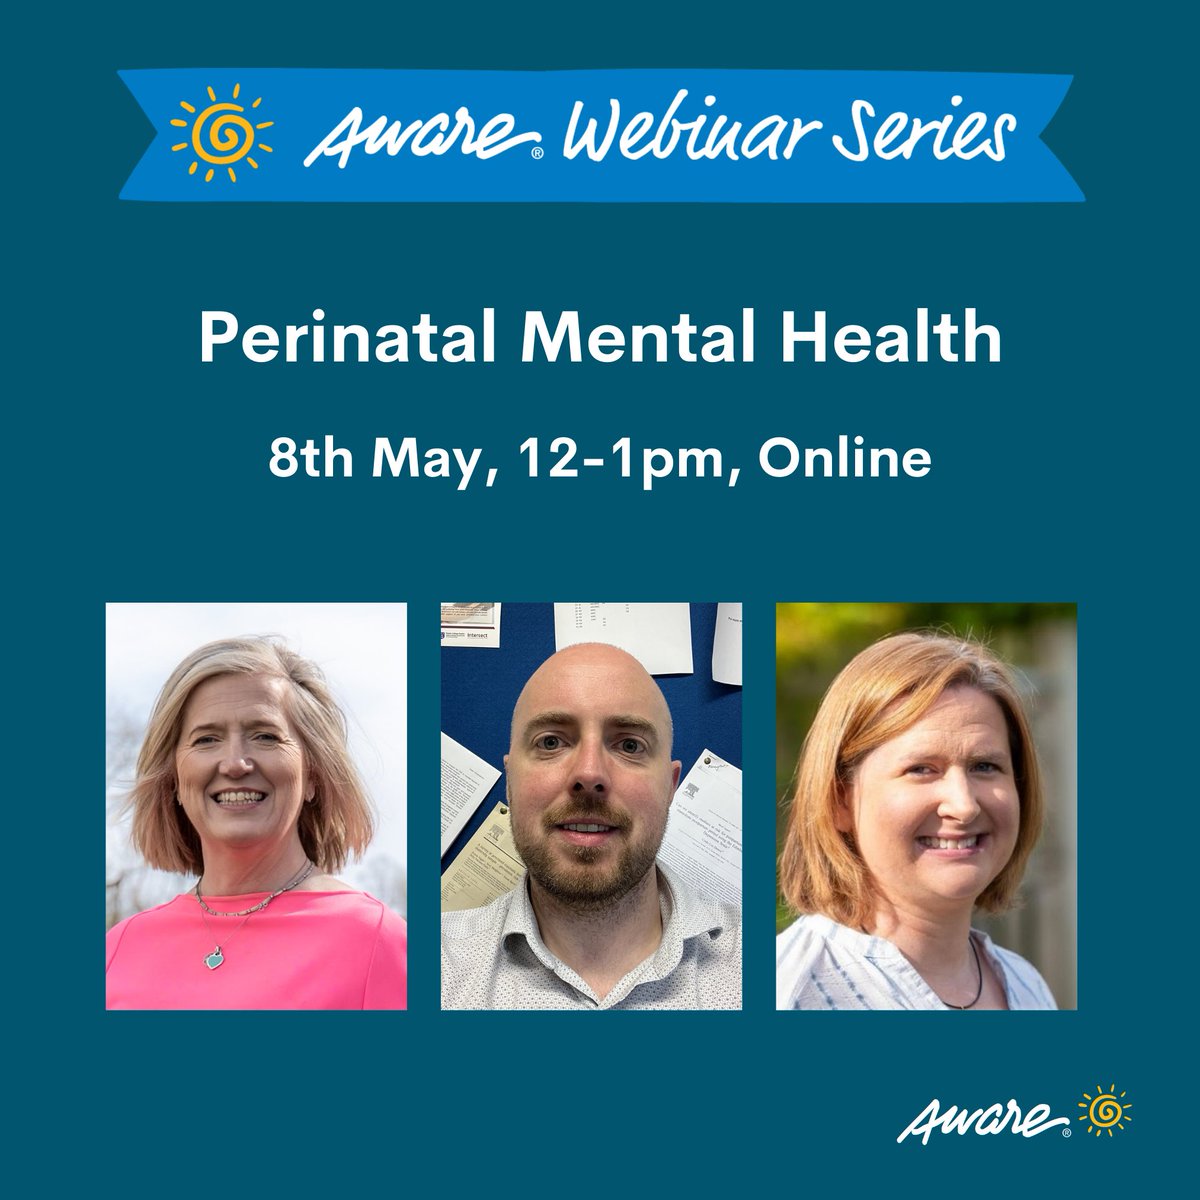 Join us for our free May webinar on perinatal mental health👉 aware.ie/webinars/upcom… We'll be joined by Dr Richard Duffy, Consultant Perinatal Psychiatrist & Dr Orla Conlon, Consultant Gynaecologist. We'll also be joined by Maria Kane who will share her lived experience story.